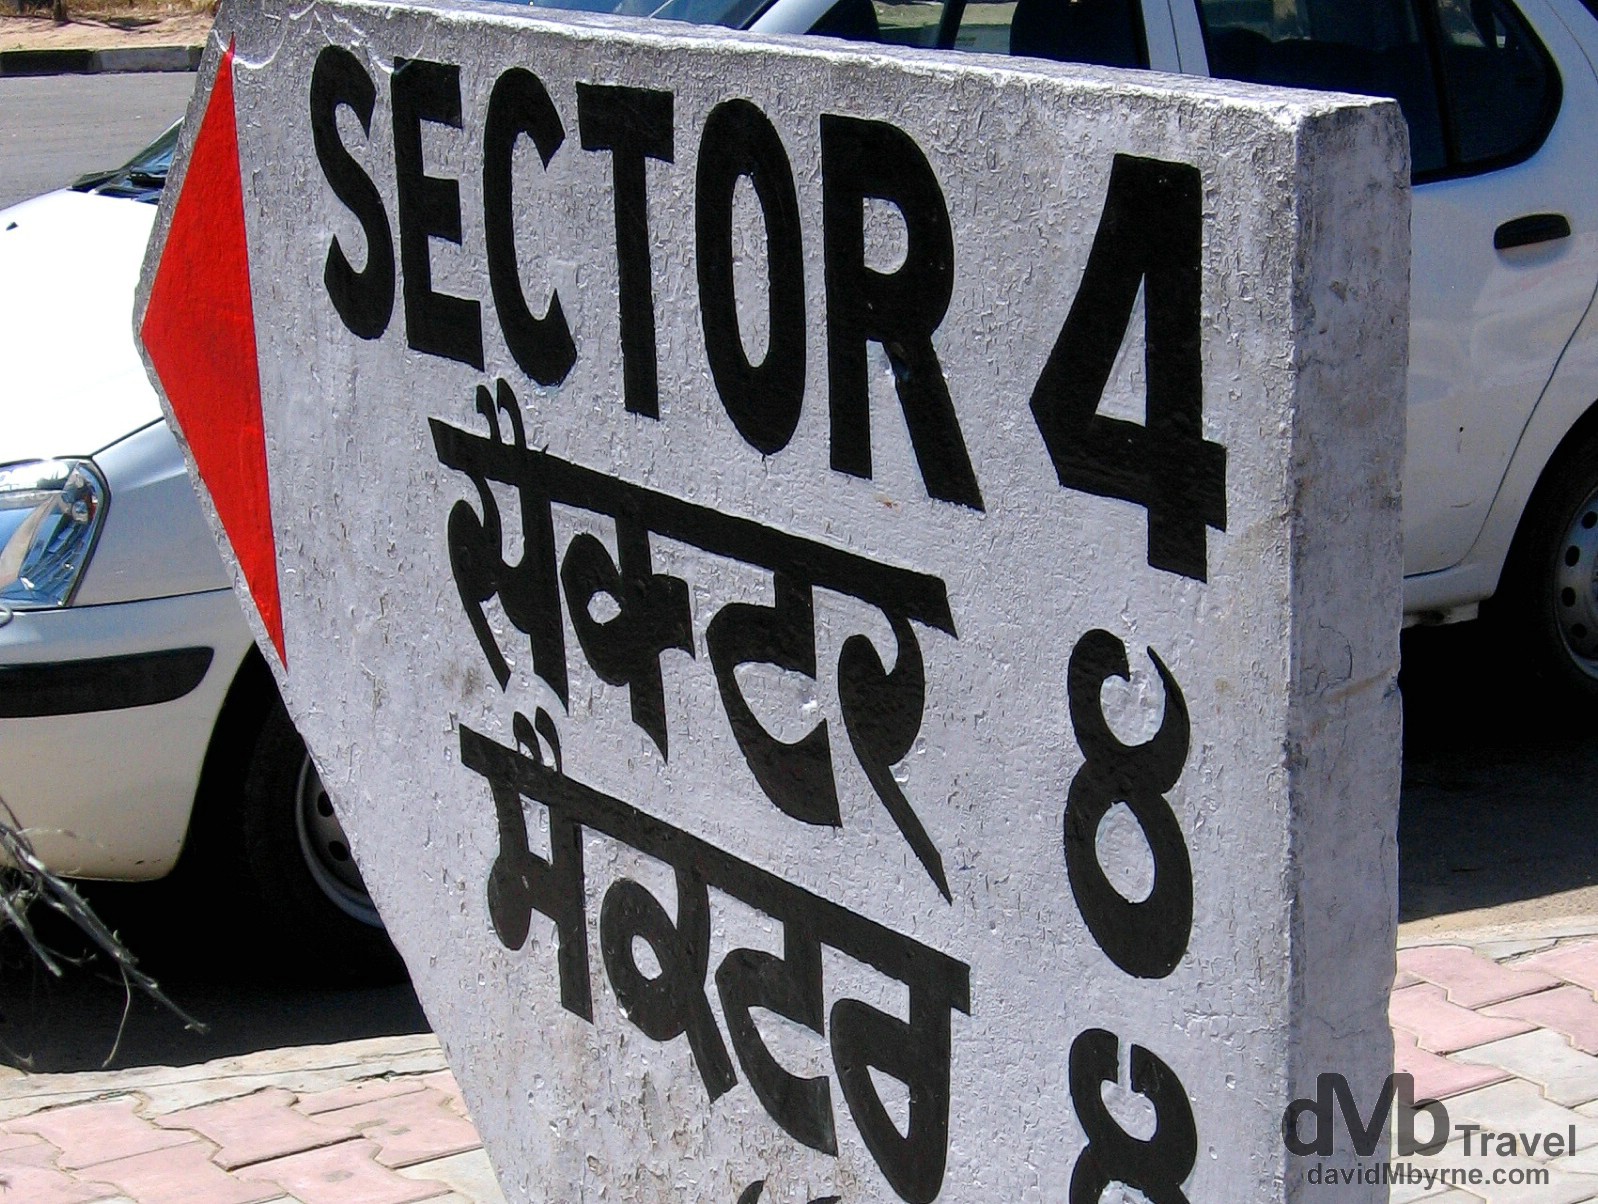 Sector signage in the planned city of Chandigarh, Punjab, India. March 23, 2008.